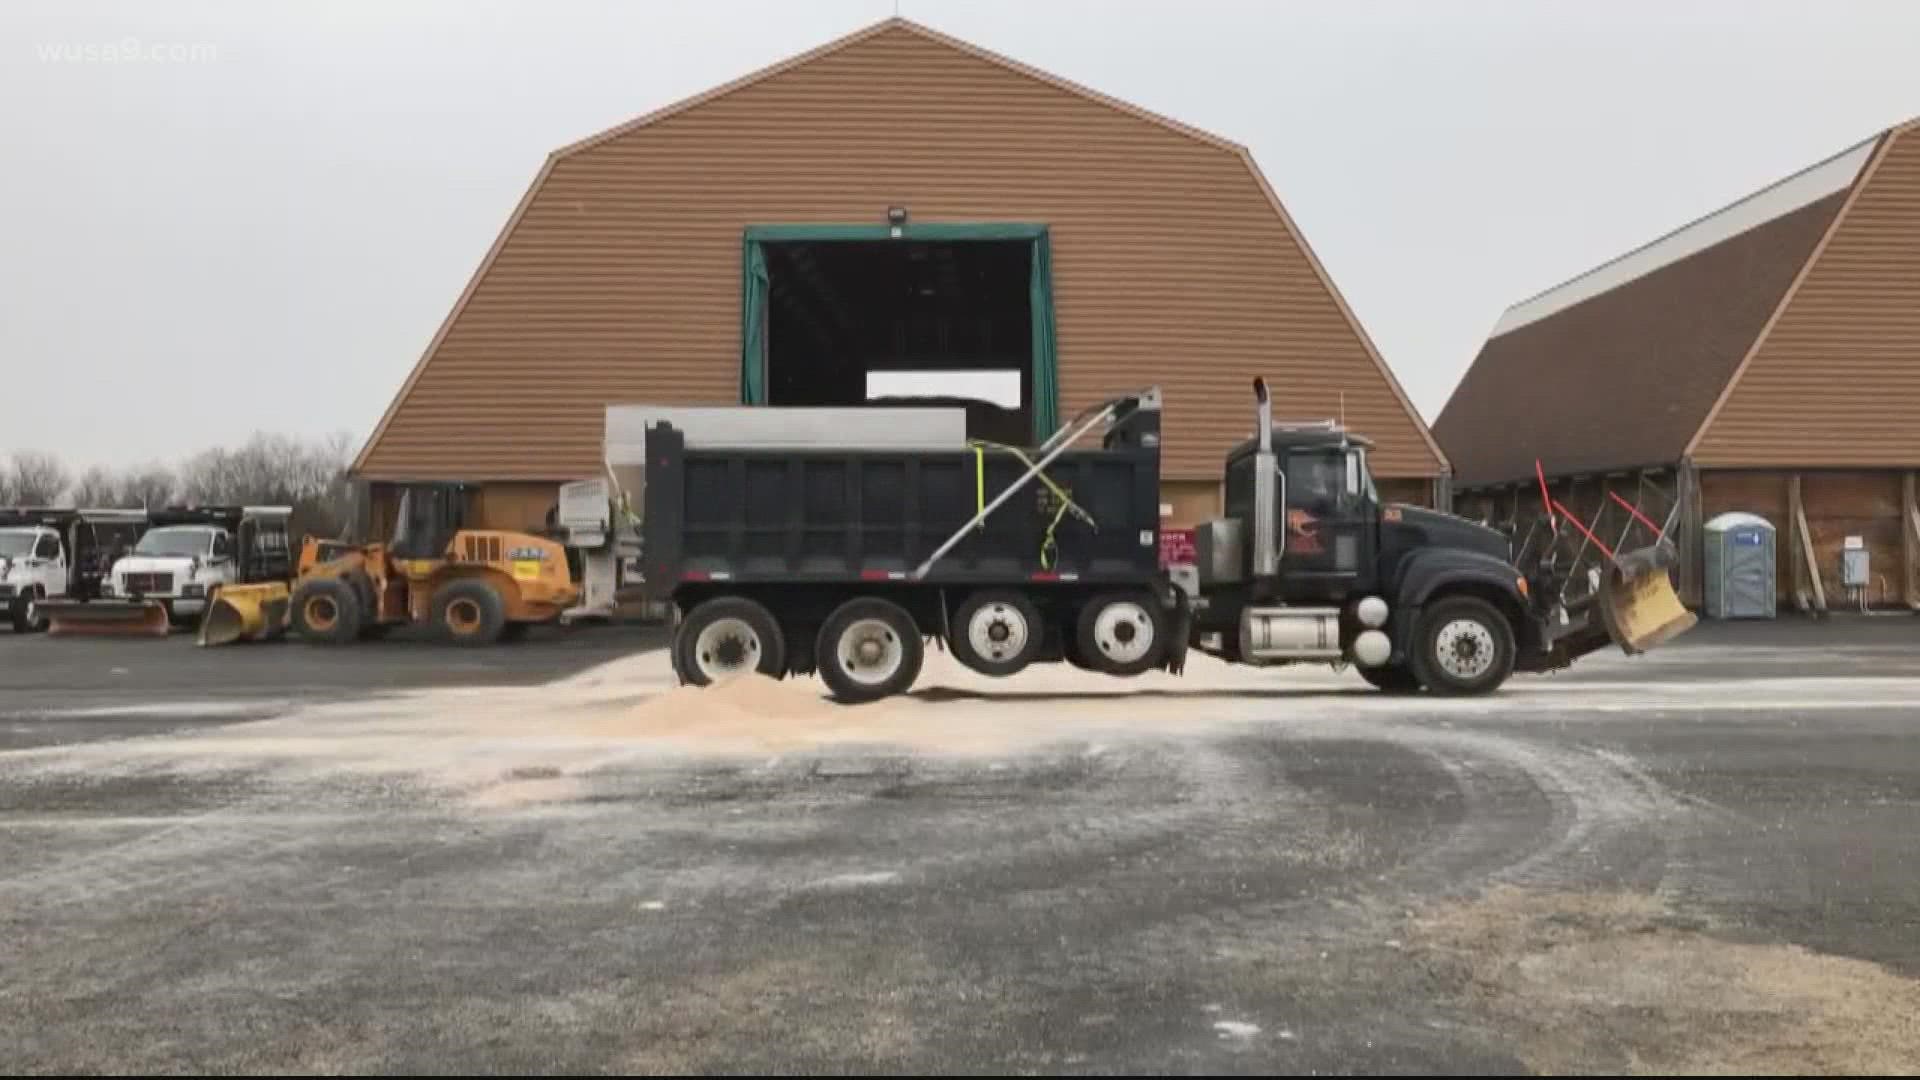 The Virginia Department of Transportation will be out on Northern Virginia roadways during the storm, with salt trucks hitting the streets early Monday morning, said